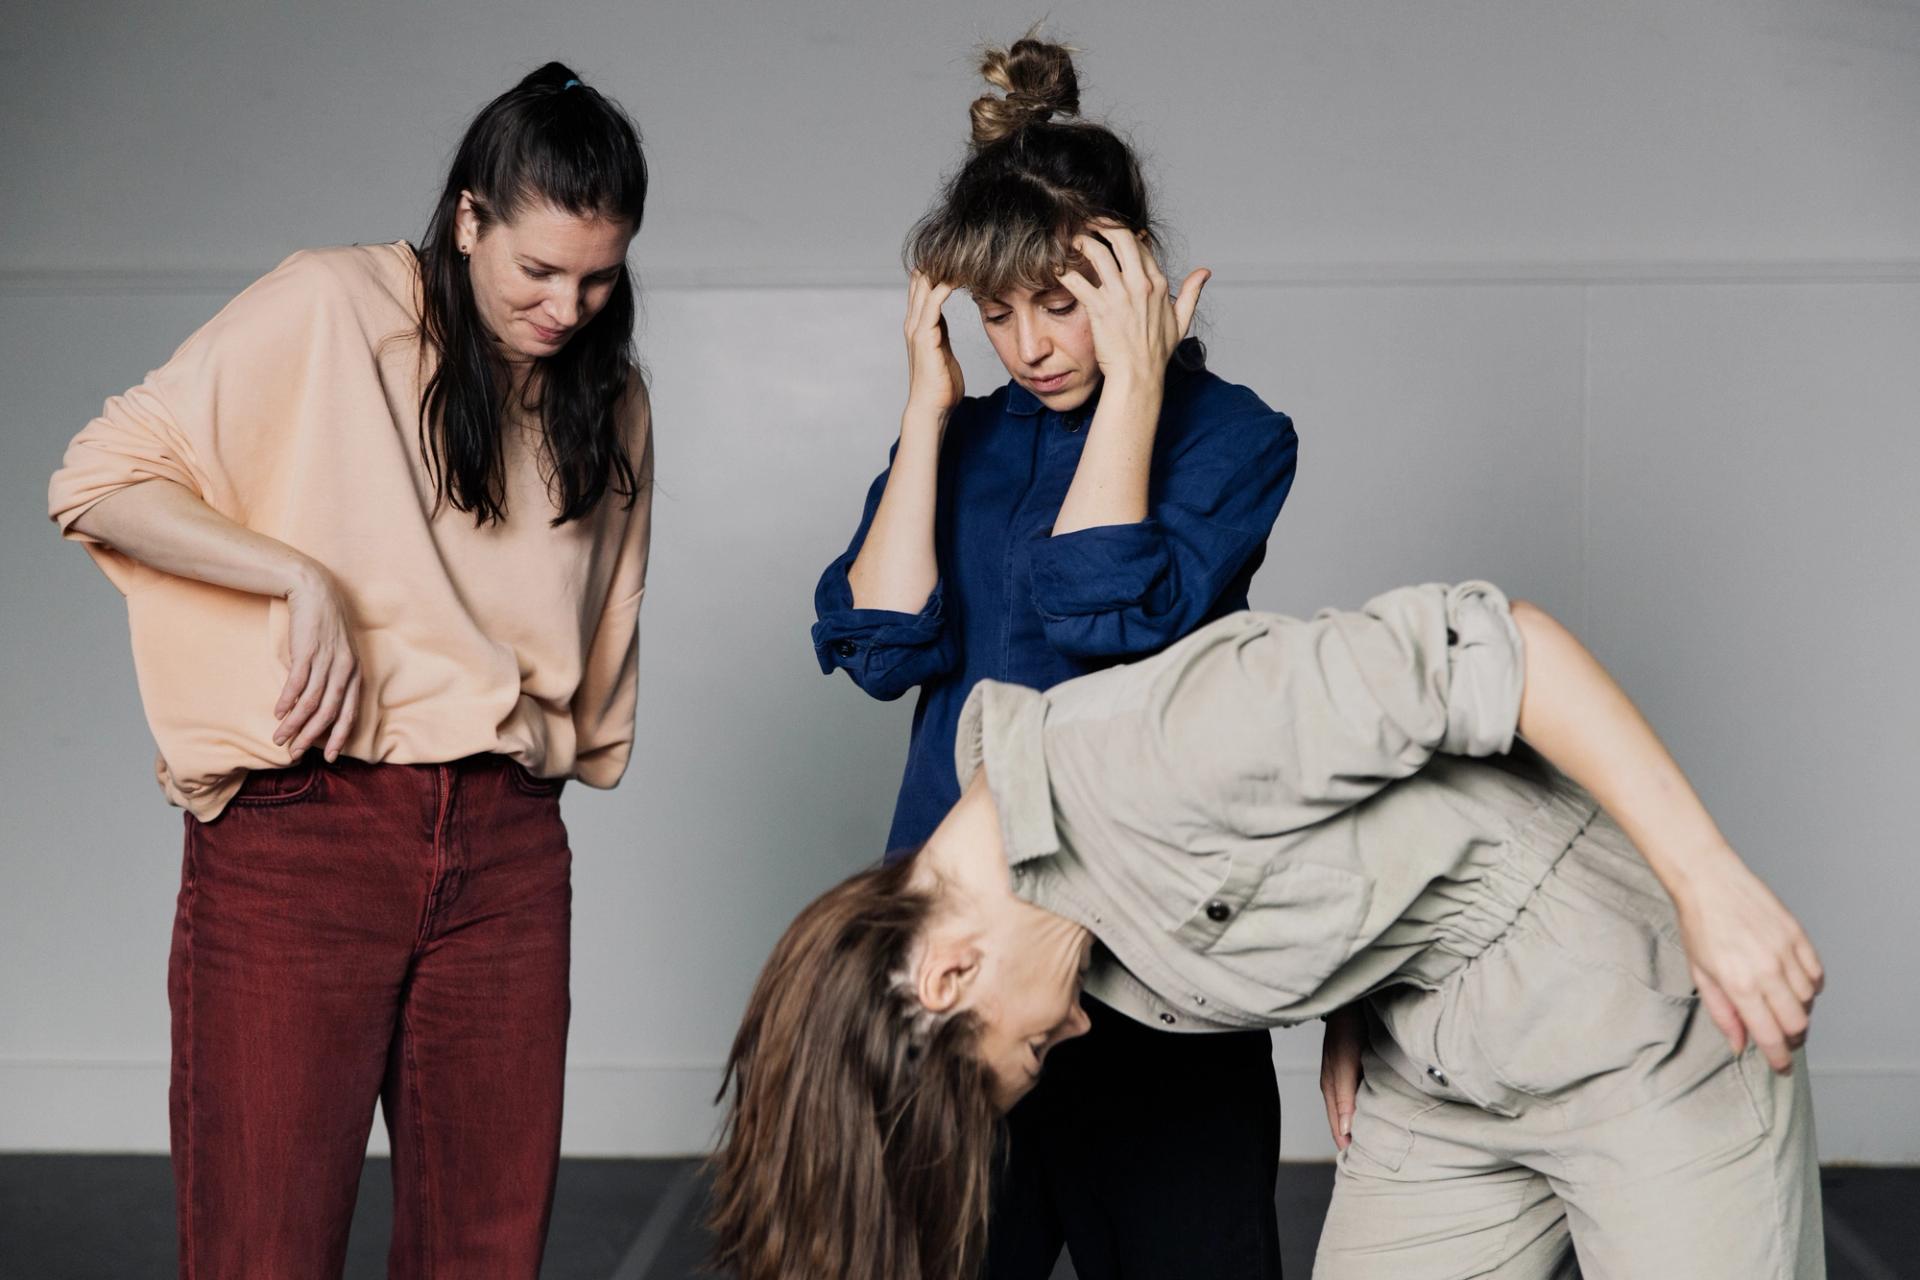 Ida, Nicola and Ingrid in a studio against a grey back wall. They are in the middle of a readjustment movements, Ingrid bending over to shake her hair, Ida correcting her short and Nicola with her hands gesturing towards her head as if thinking. The atmosphere is light. 